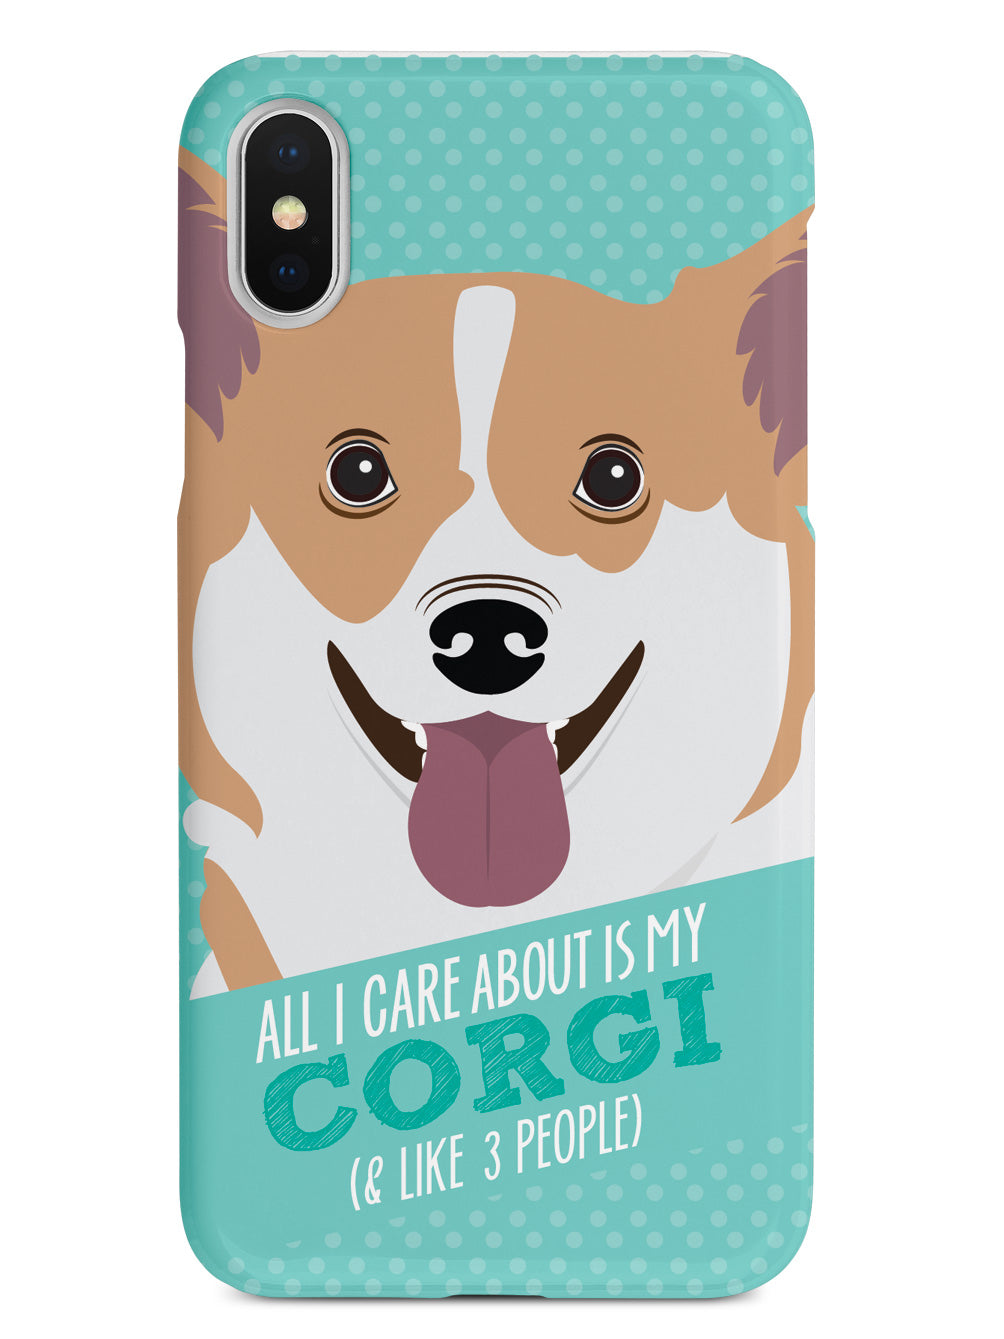 All I Care About Is My Corgi Case